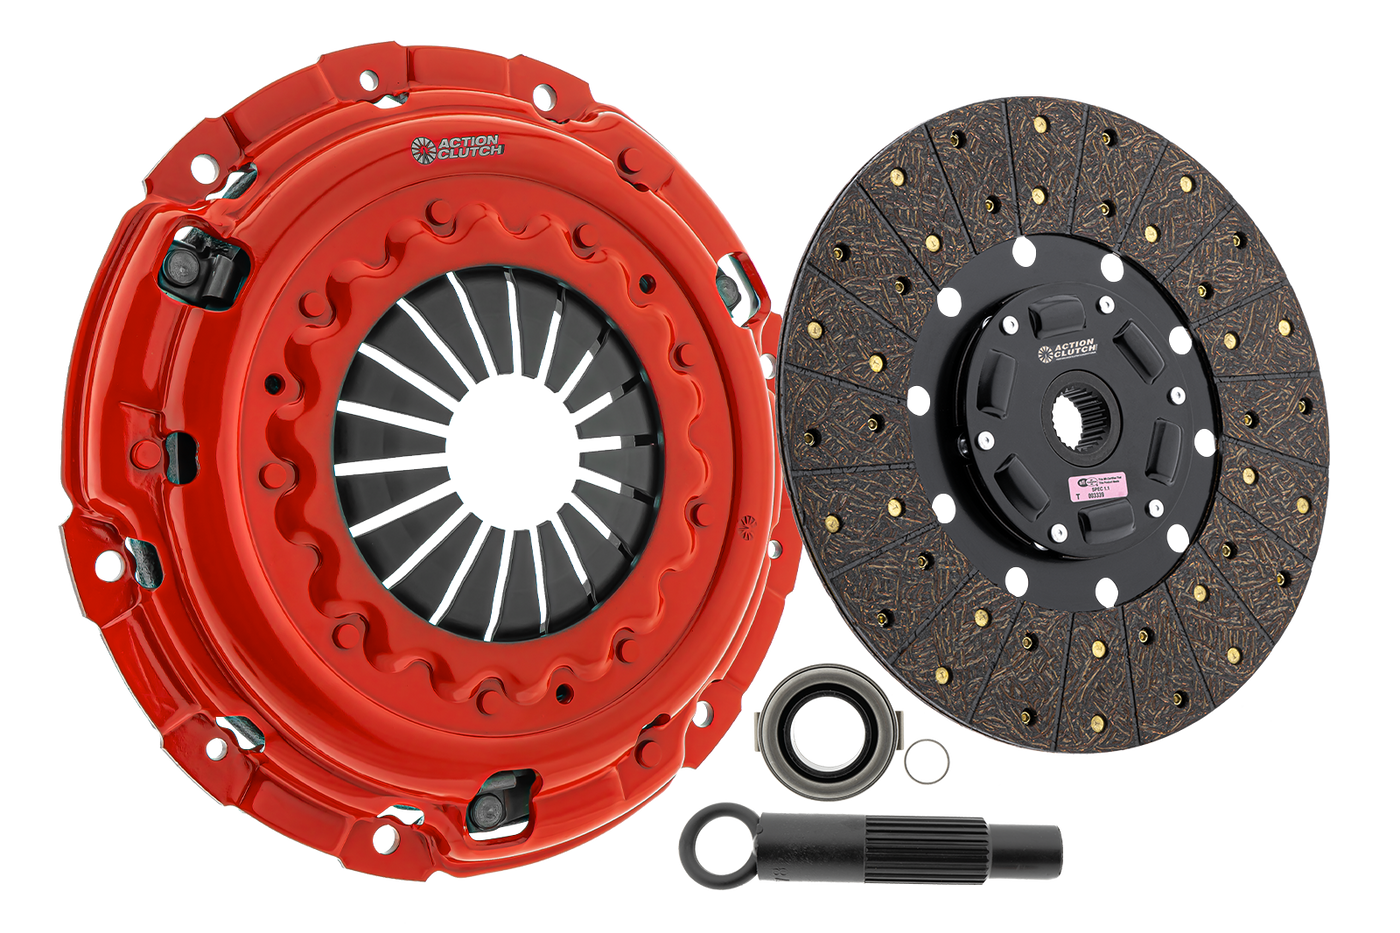 Stage 1 Clutch Kit (1OS) for Audi TT 2000-2006 1.8L Turbo FWD Only Includes Lightened Flywheel